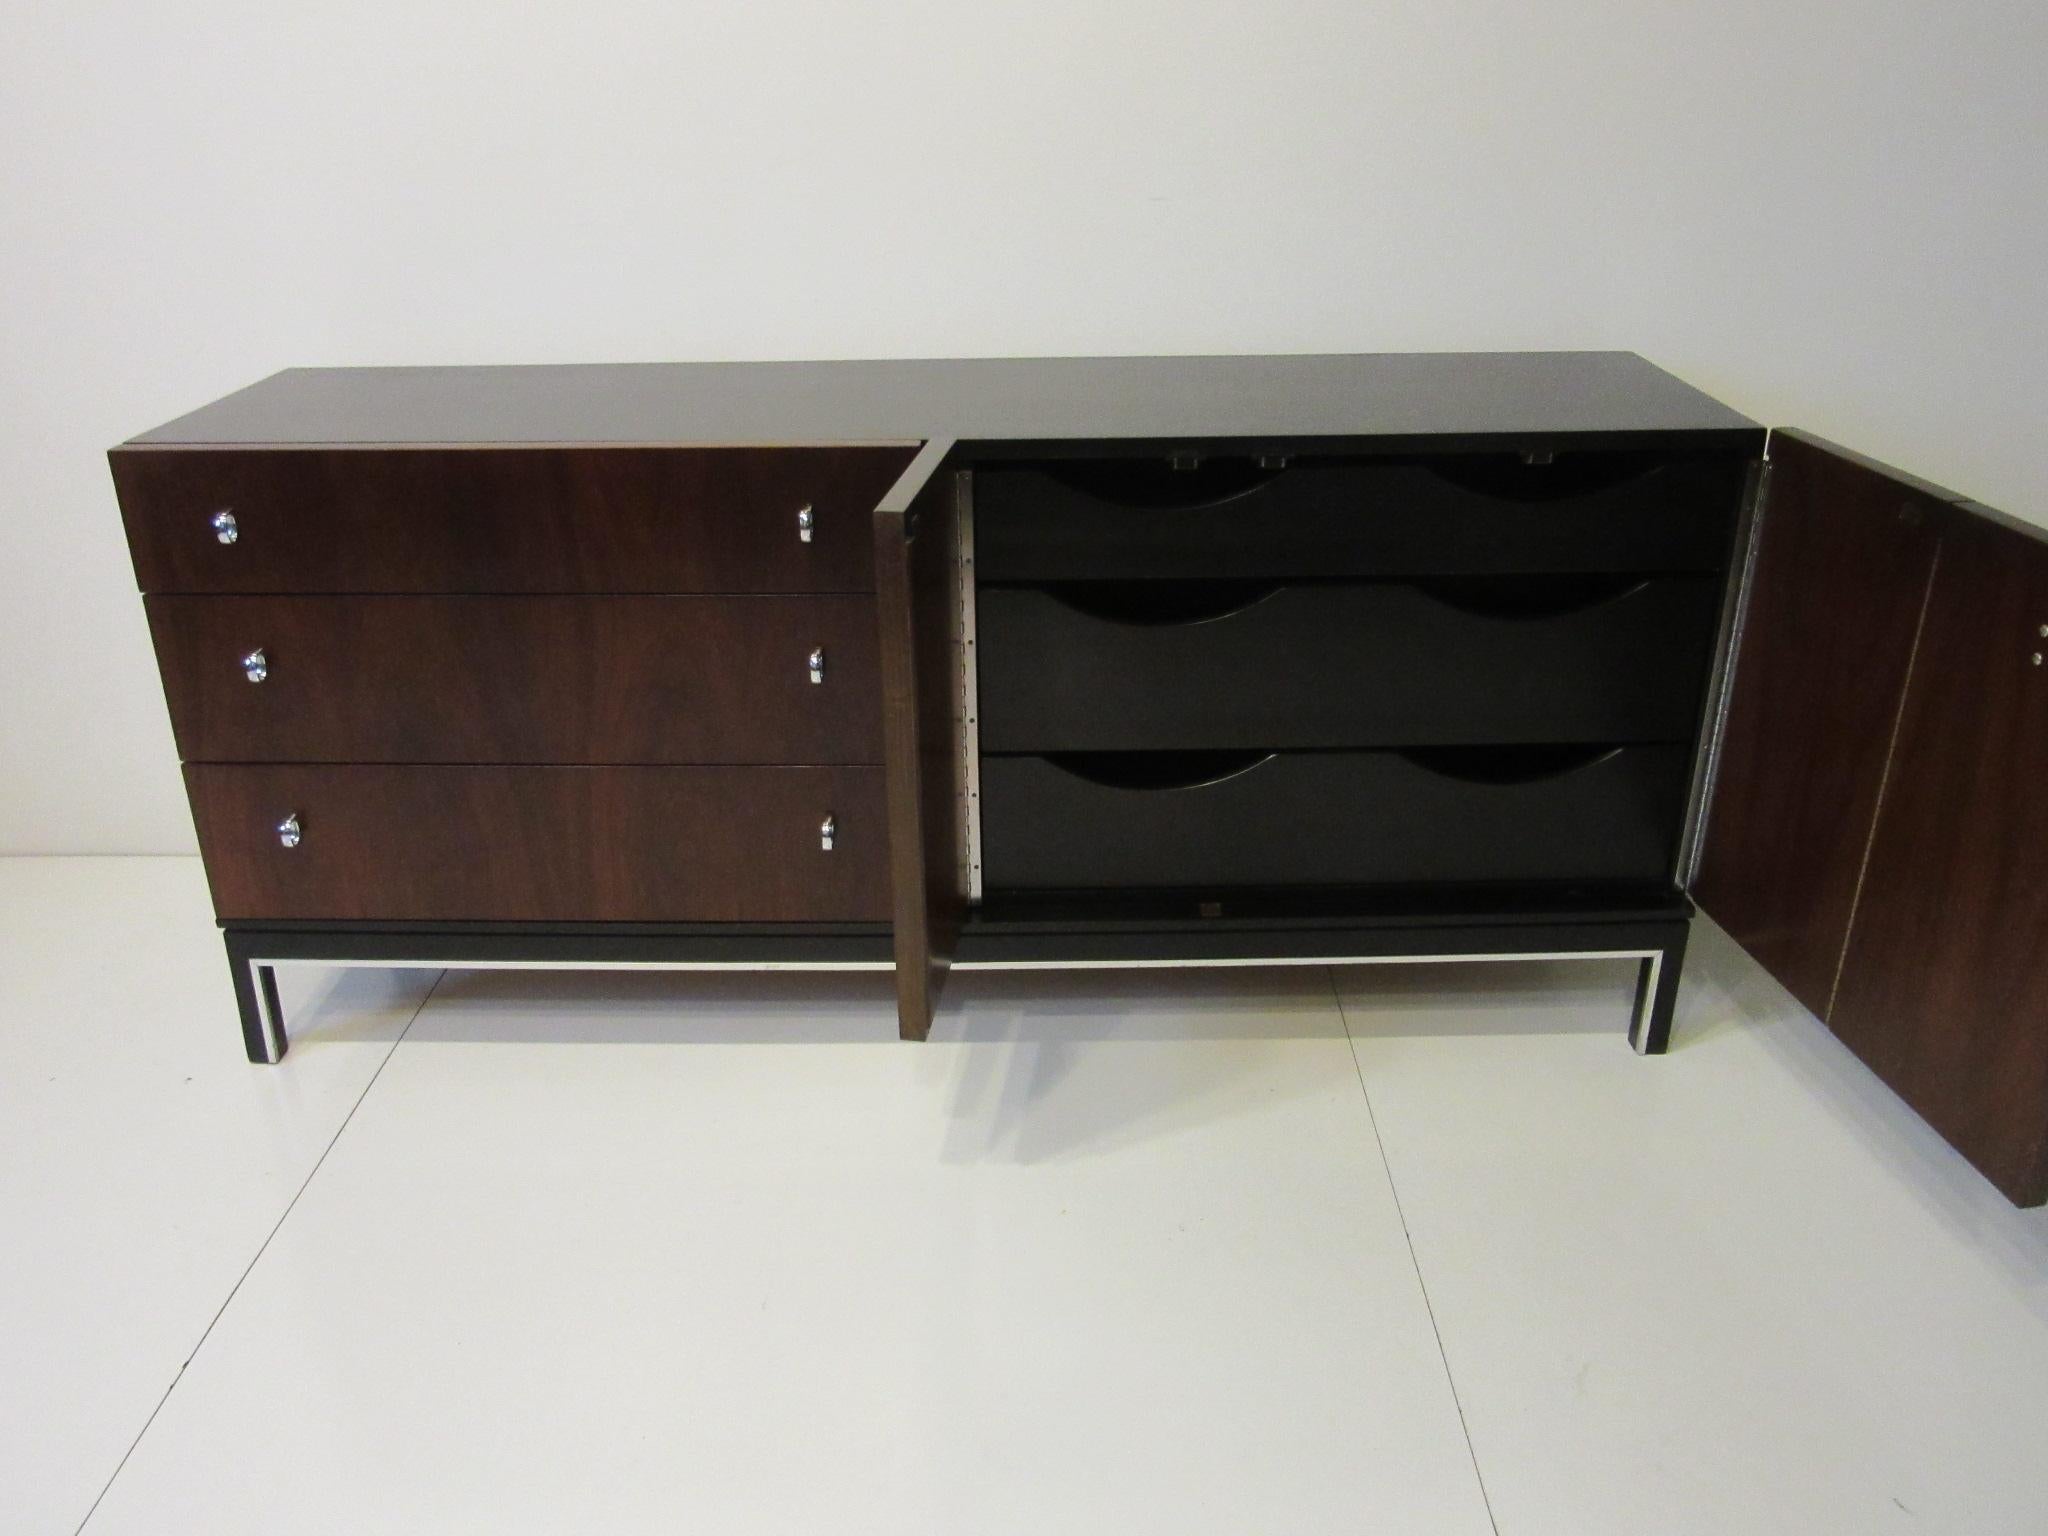 Wood Rosewood Ebony Dresser / Credenza by American of Martinsville